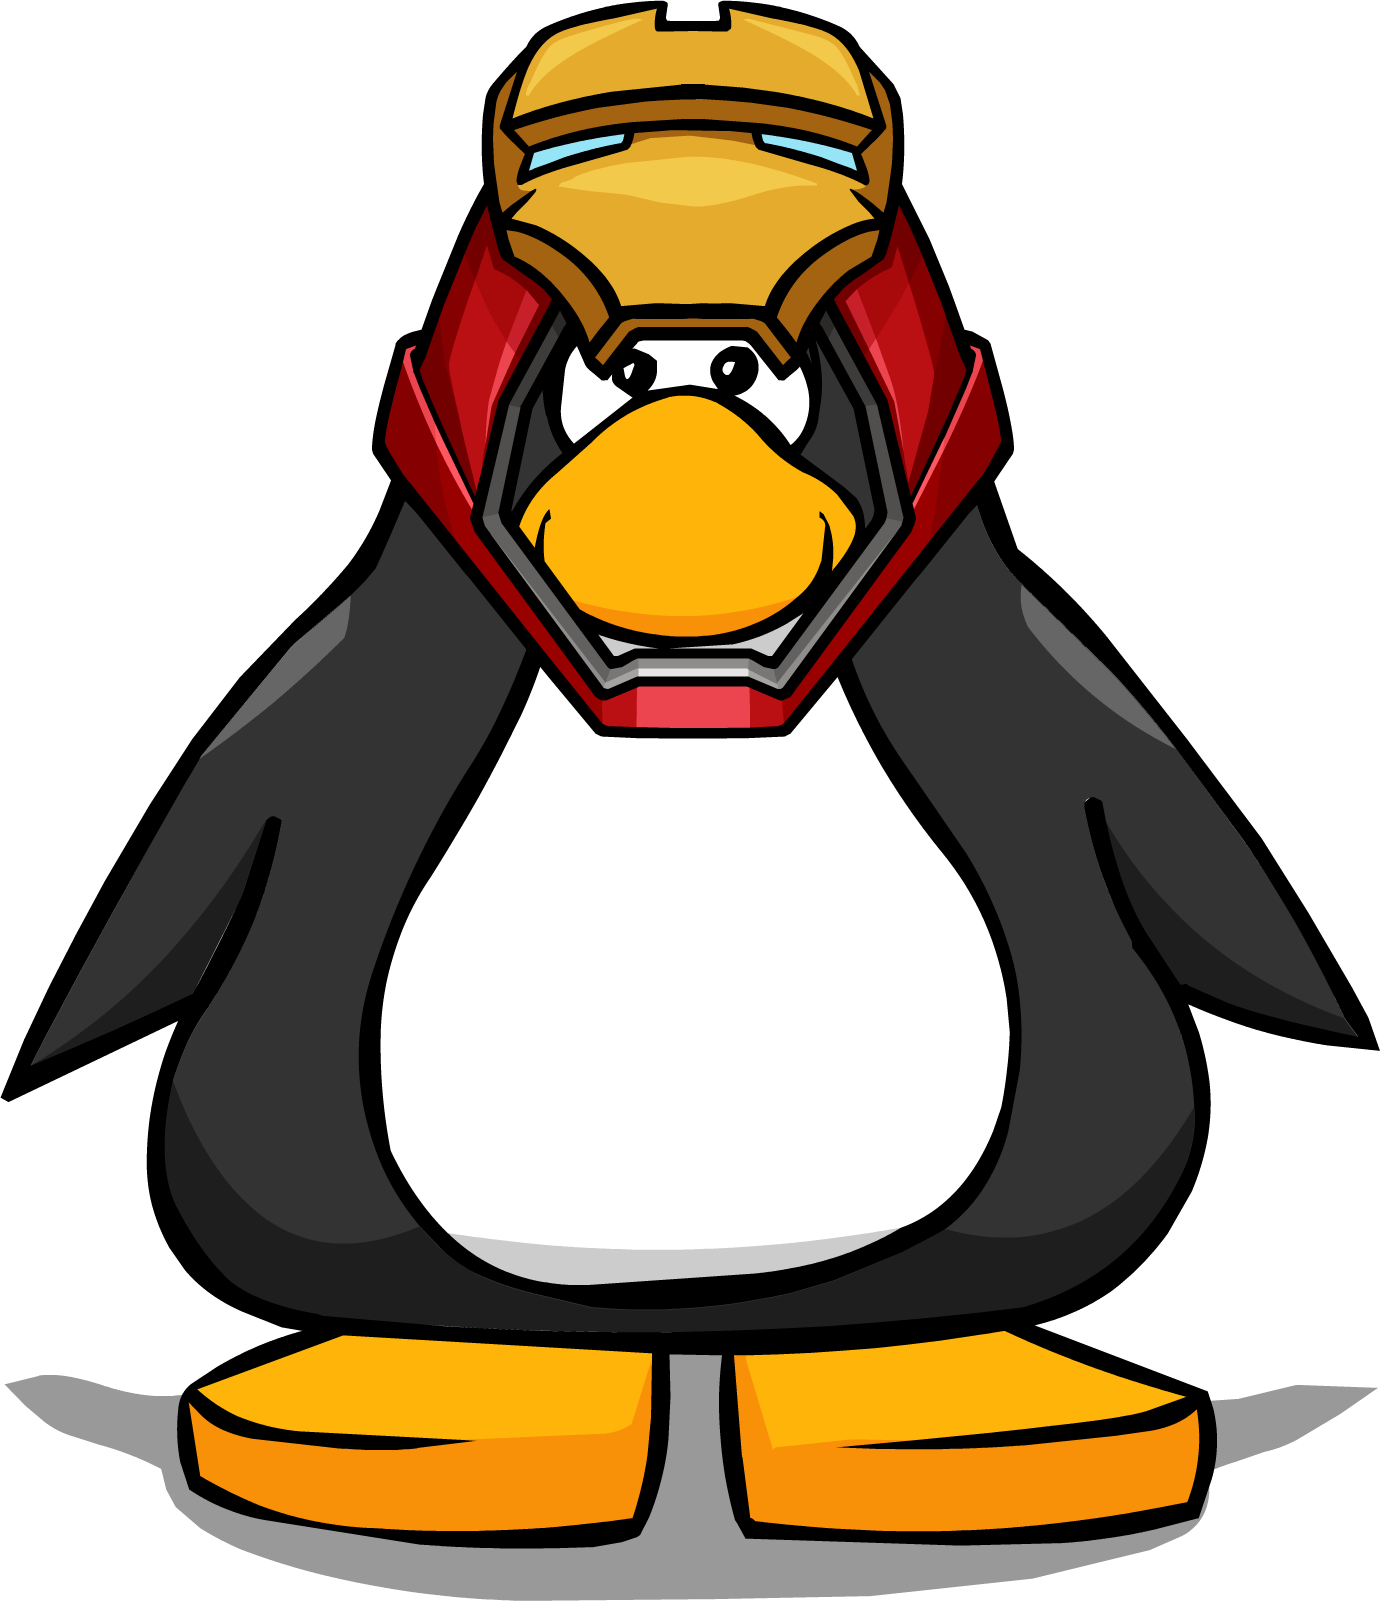 Iron Man Cowl From A Player Card - Club Penguin Tour Guide Hat (1380x1601)